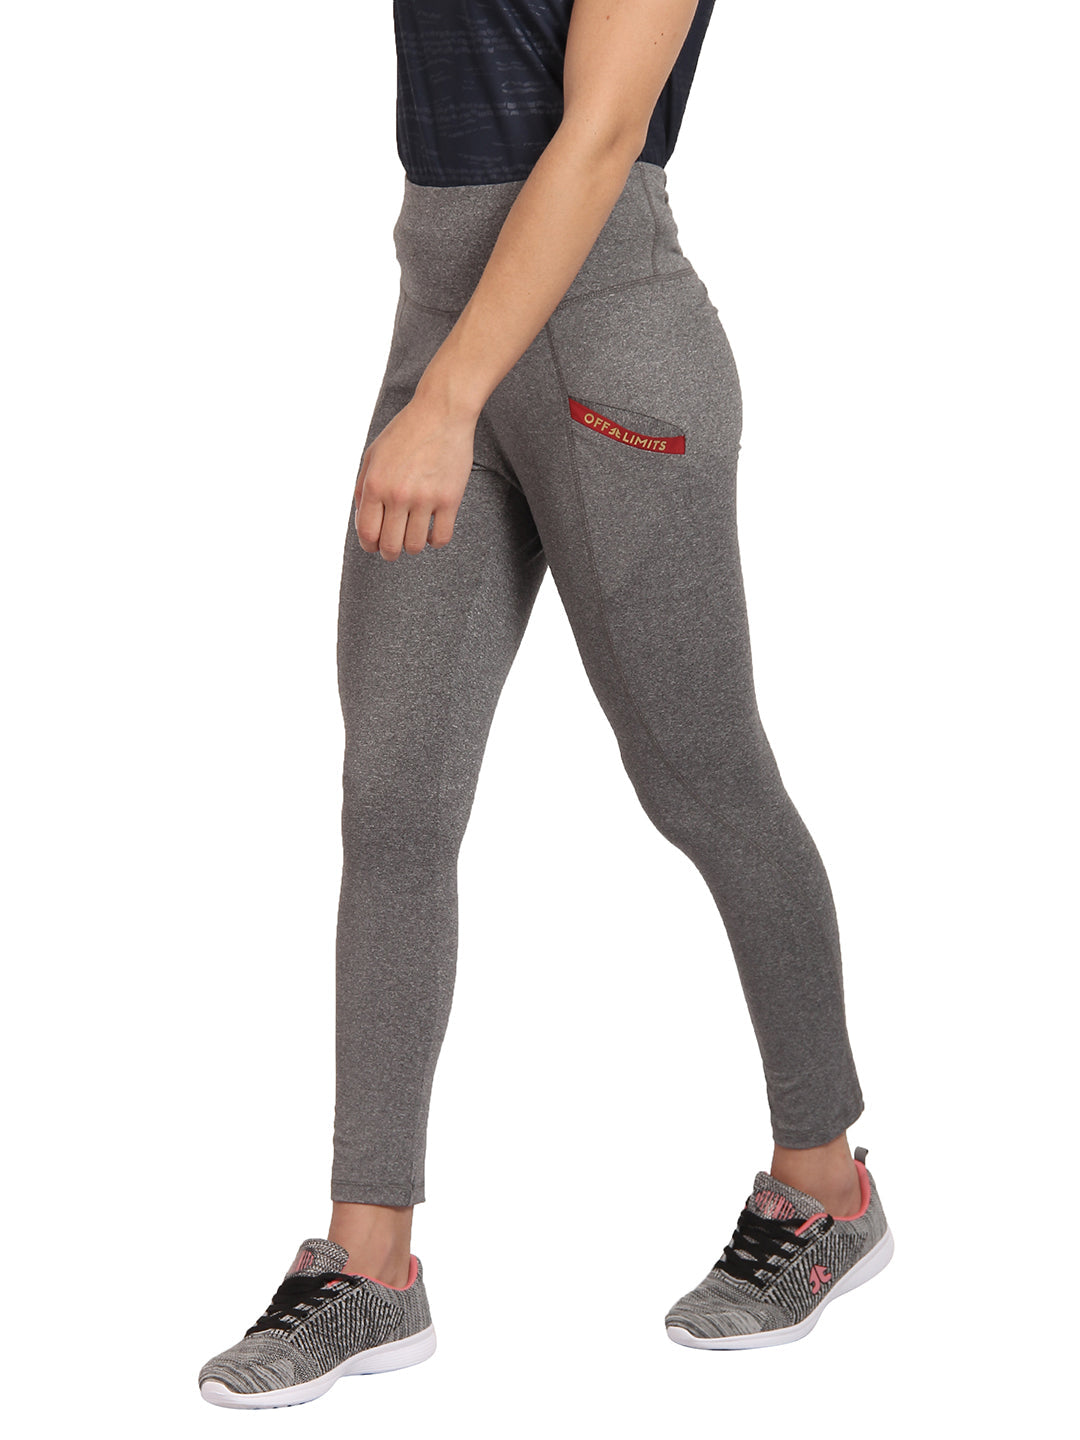 GRINDLE RUNNING TRACK Women Tights